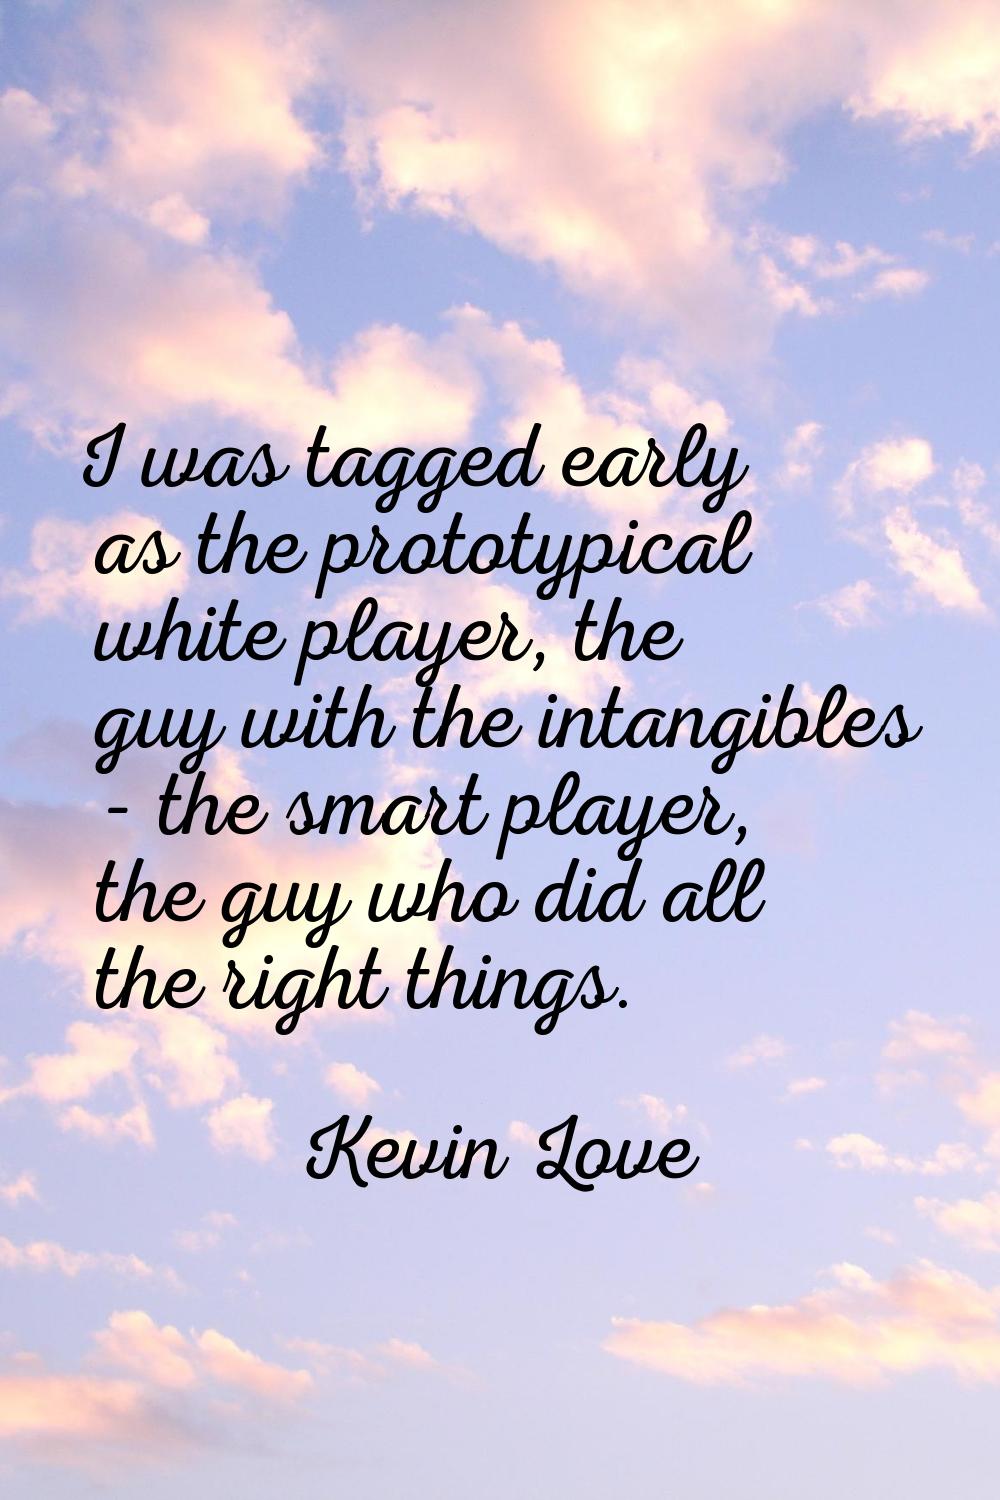 I was tagged early as the prototypical white player, the guy with the intangibles - the smart playe